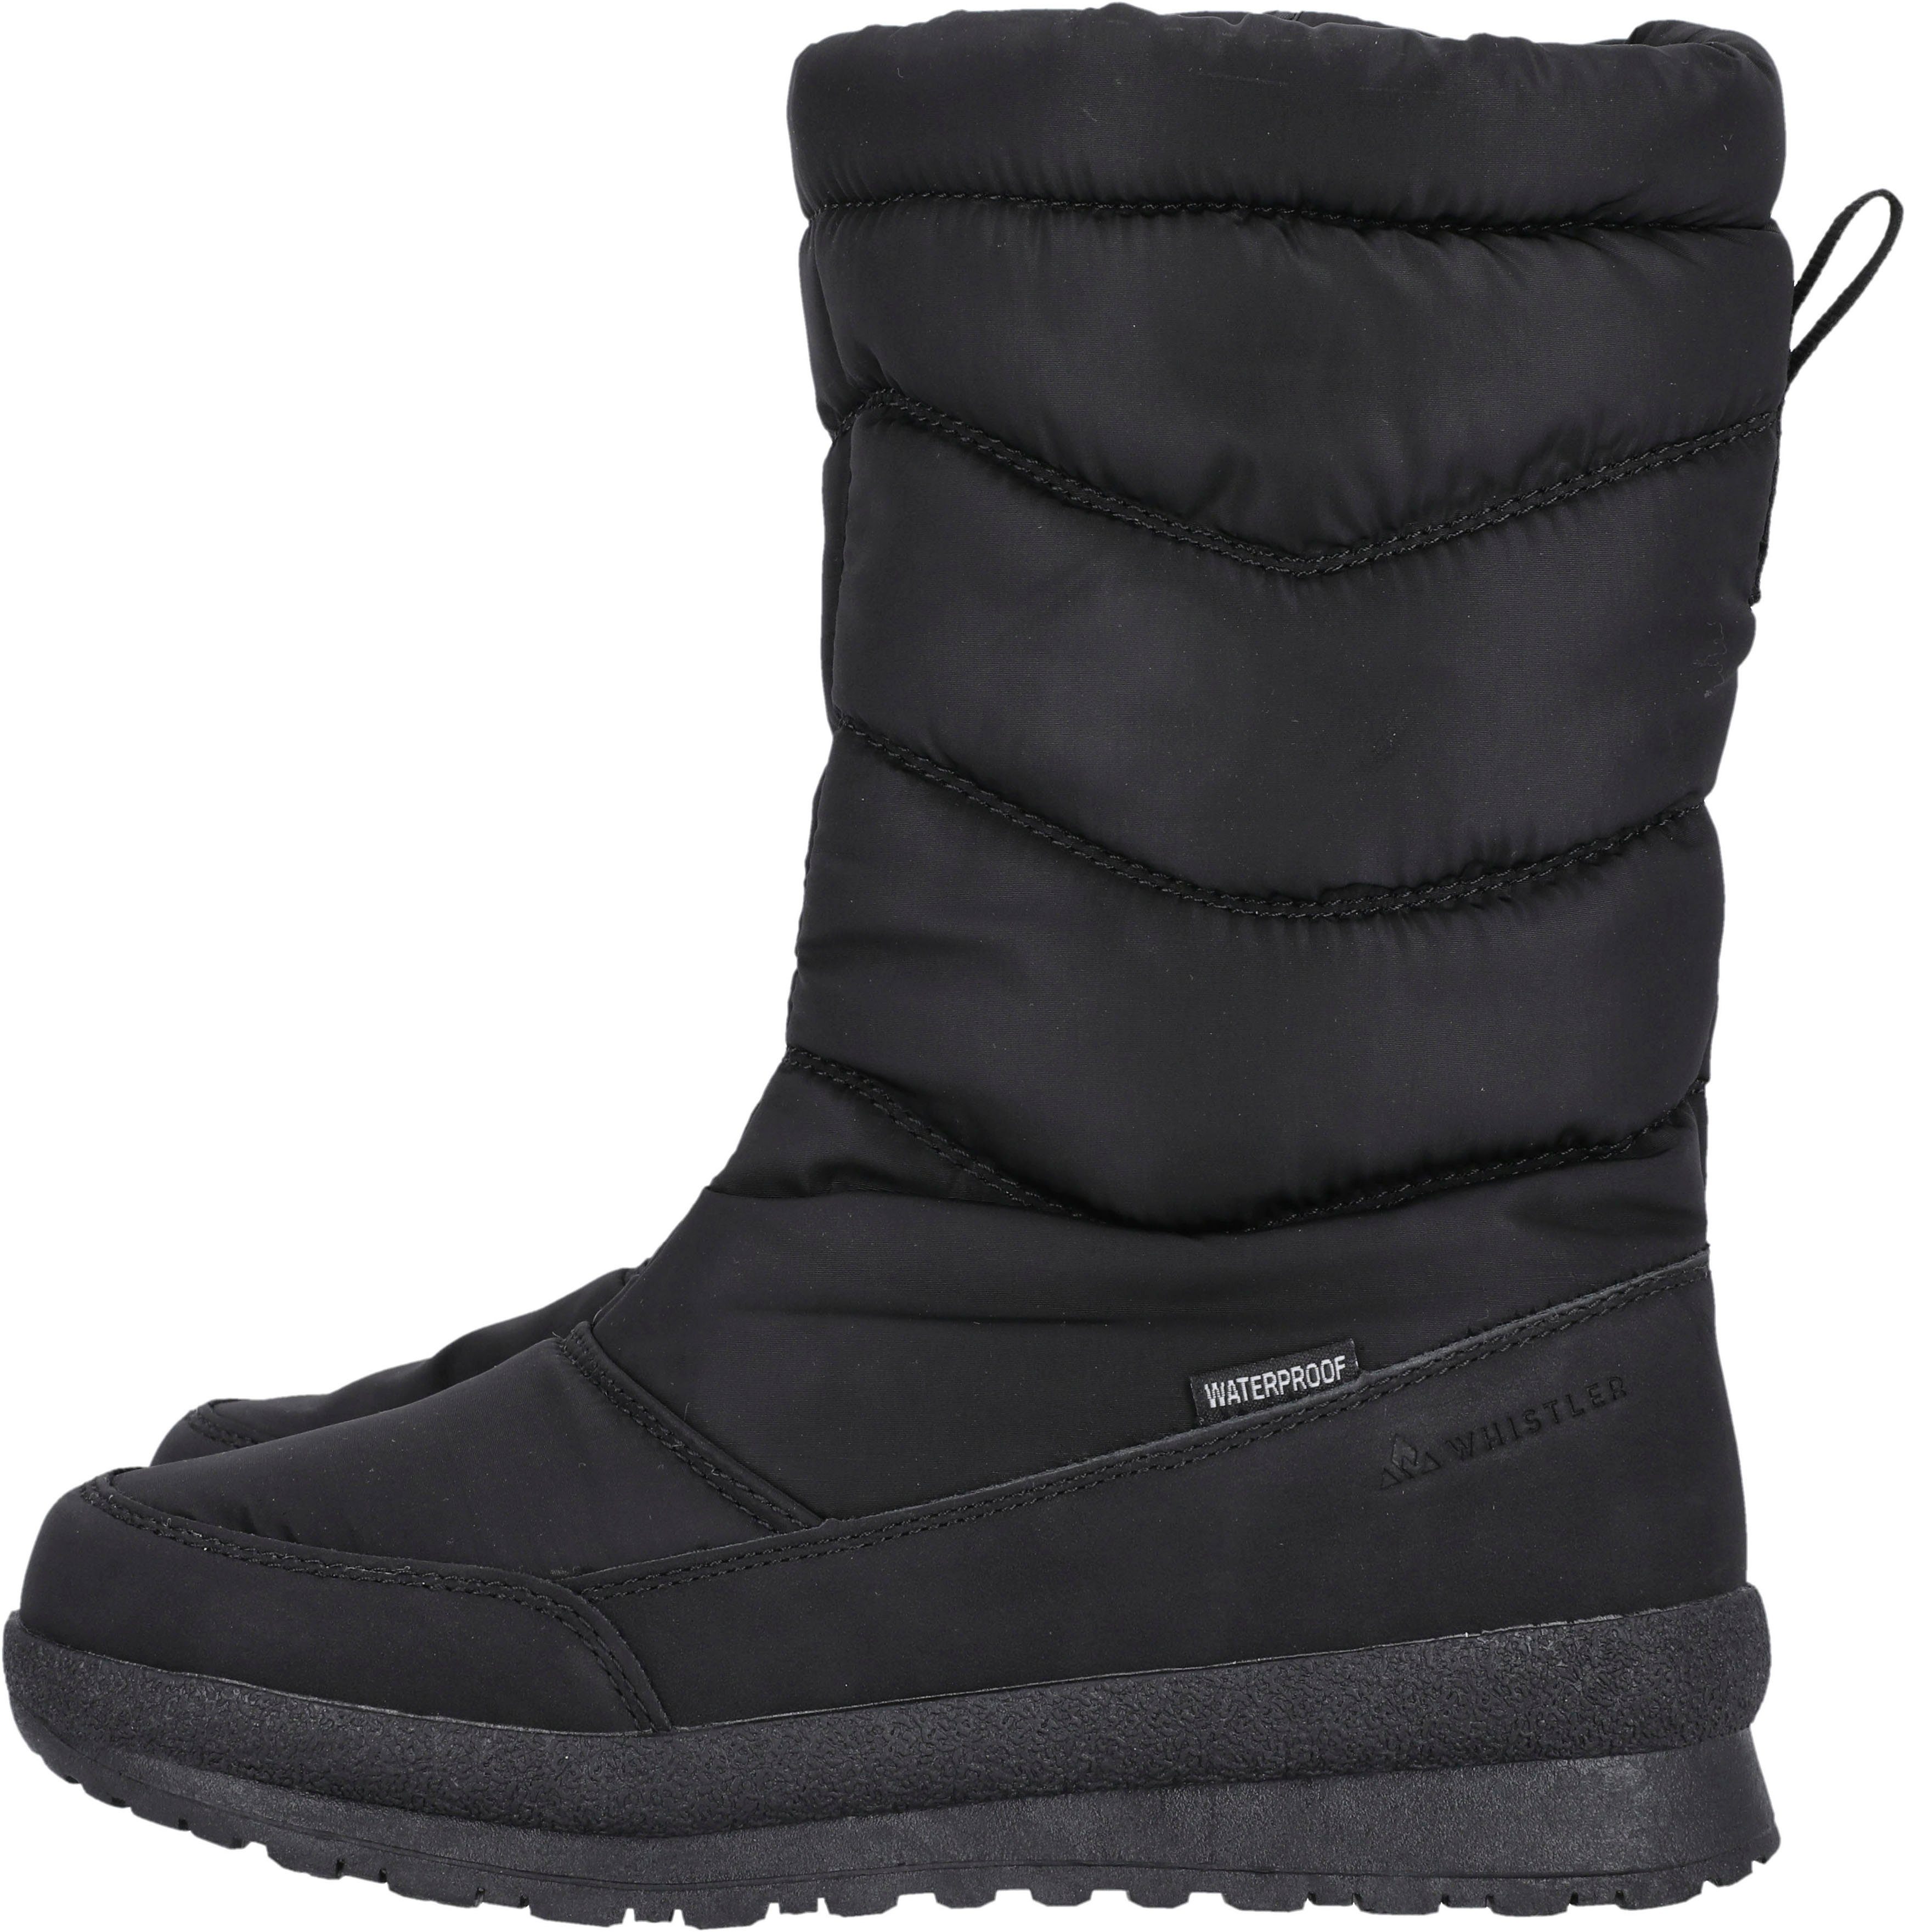 WHW234153 Winterboots Warmfutter WHISTLER